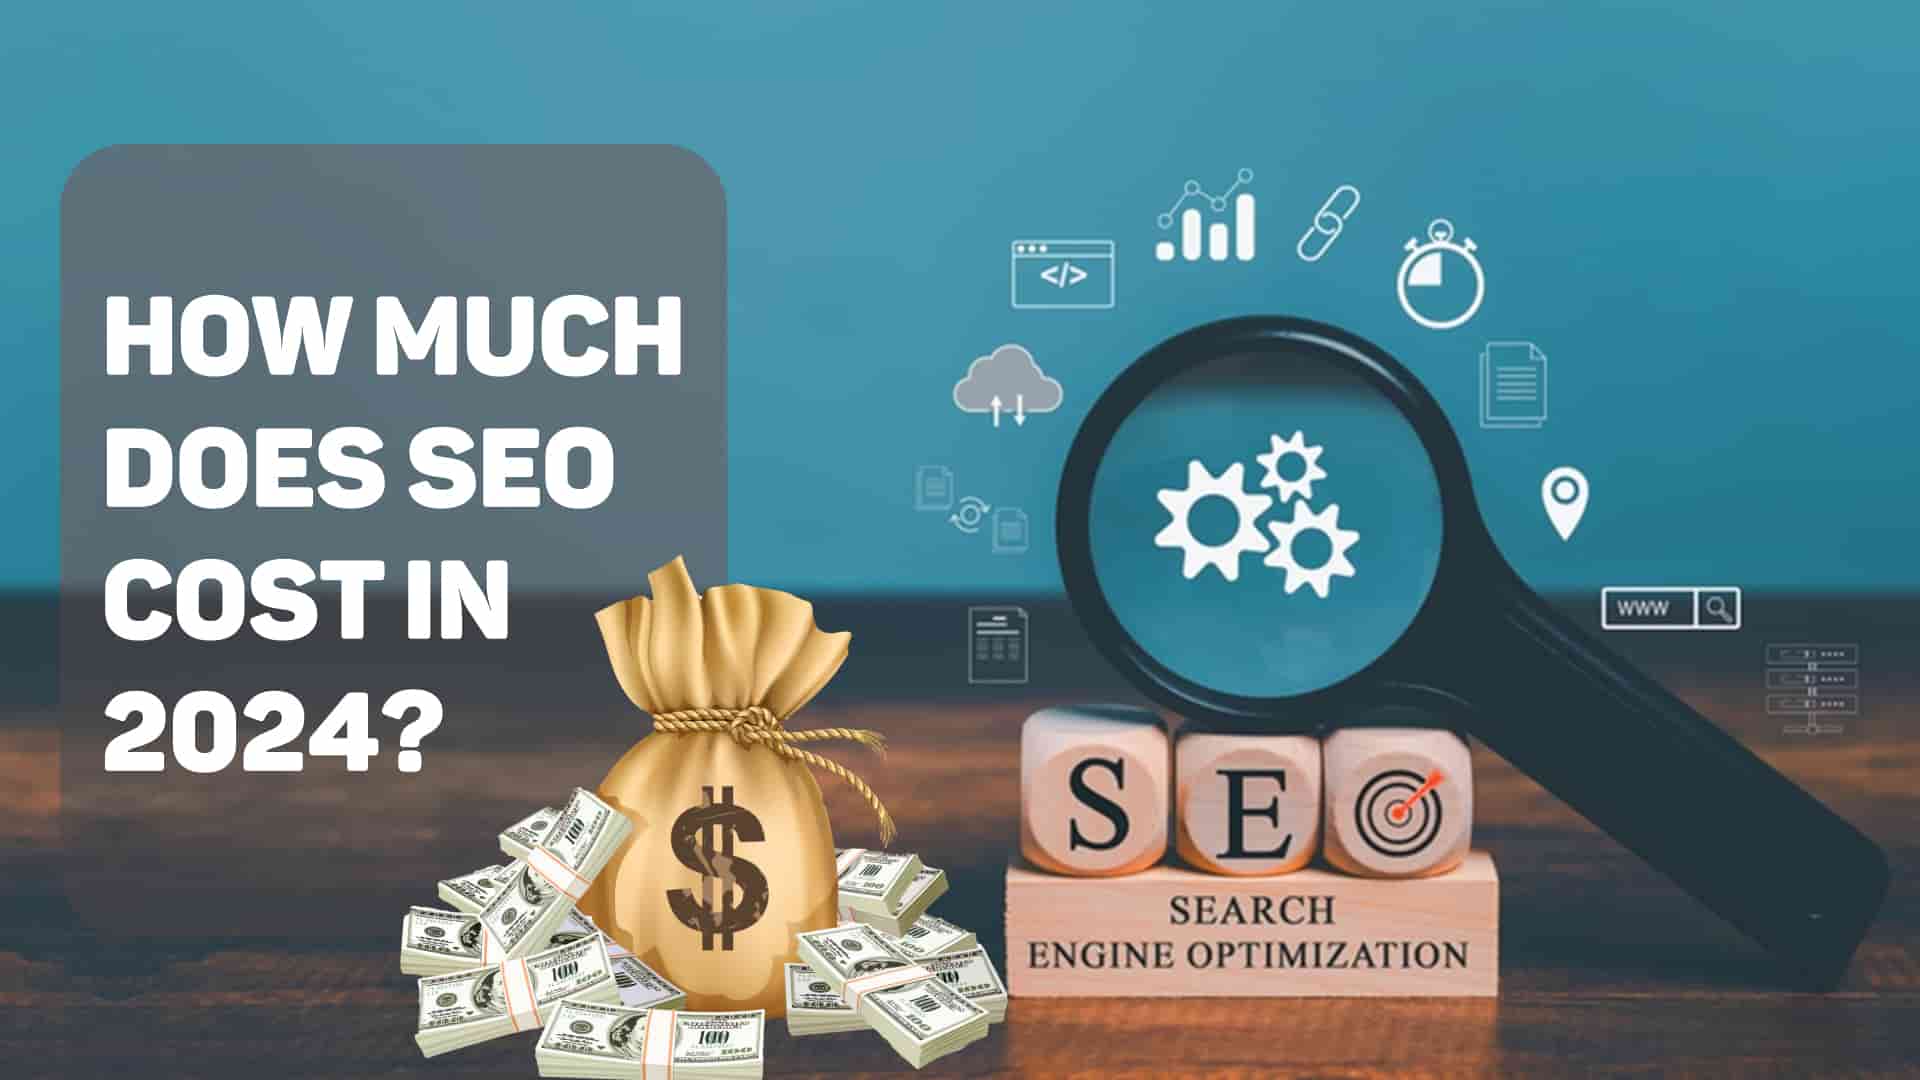 How Much Does SEO Cost in 2024?